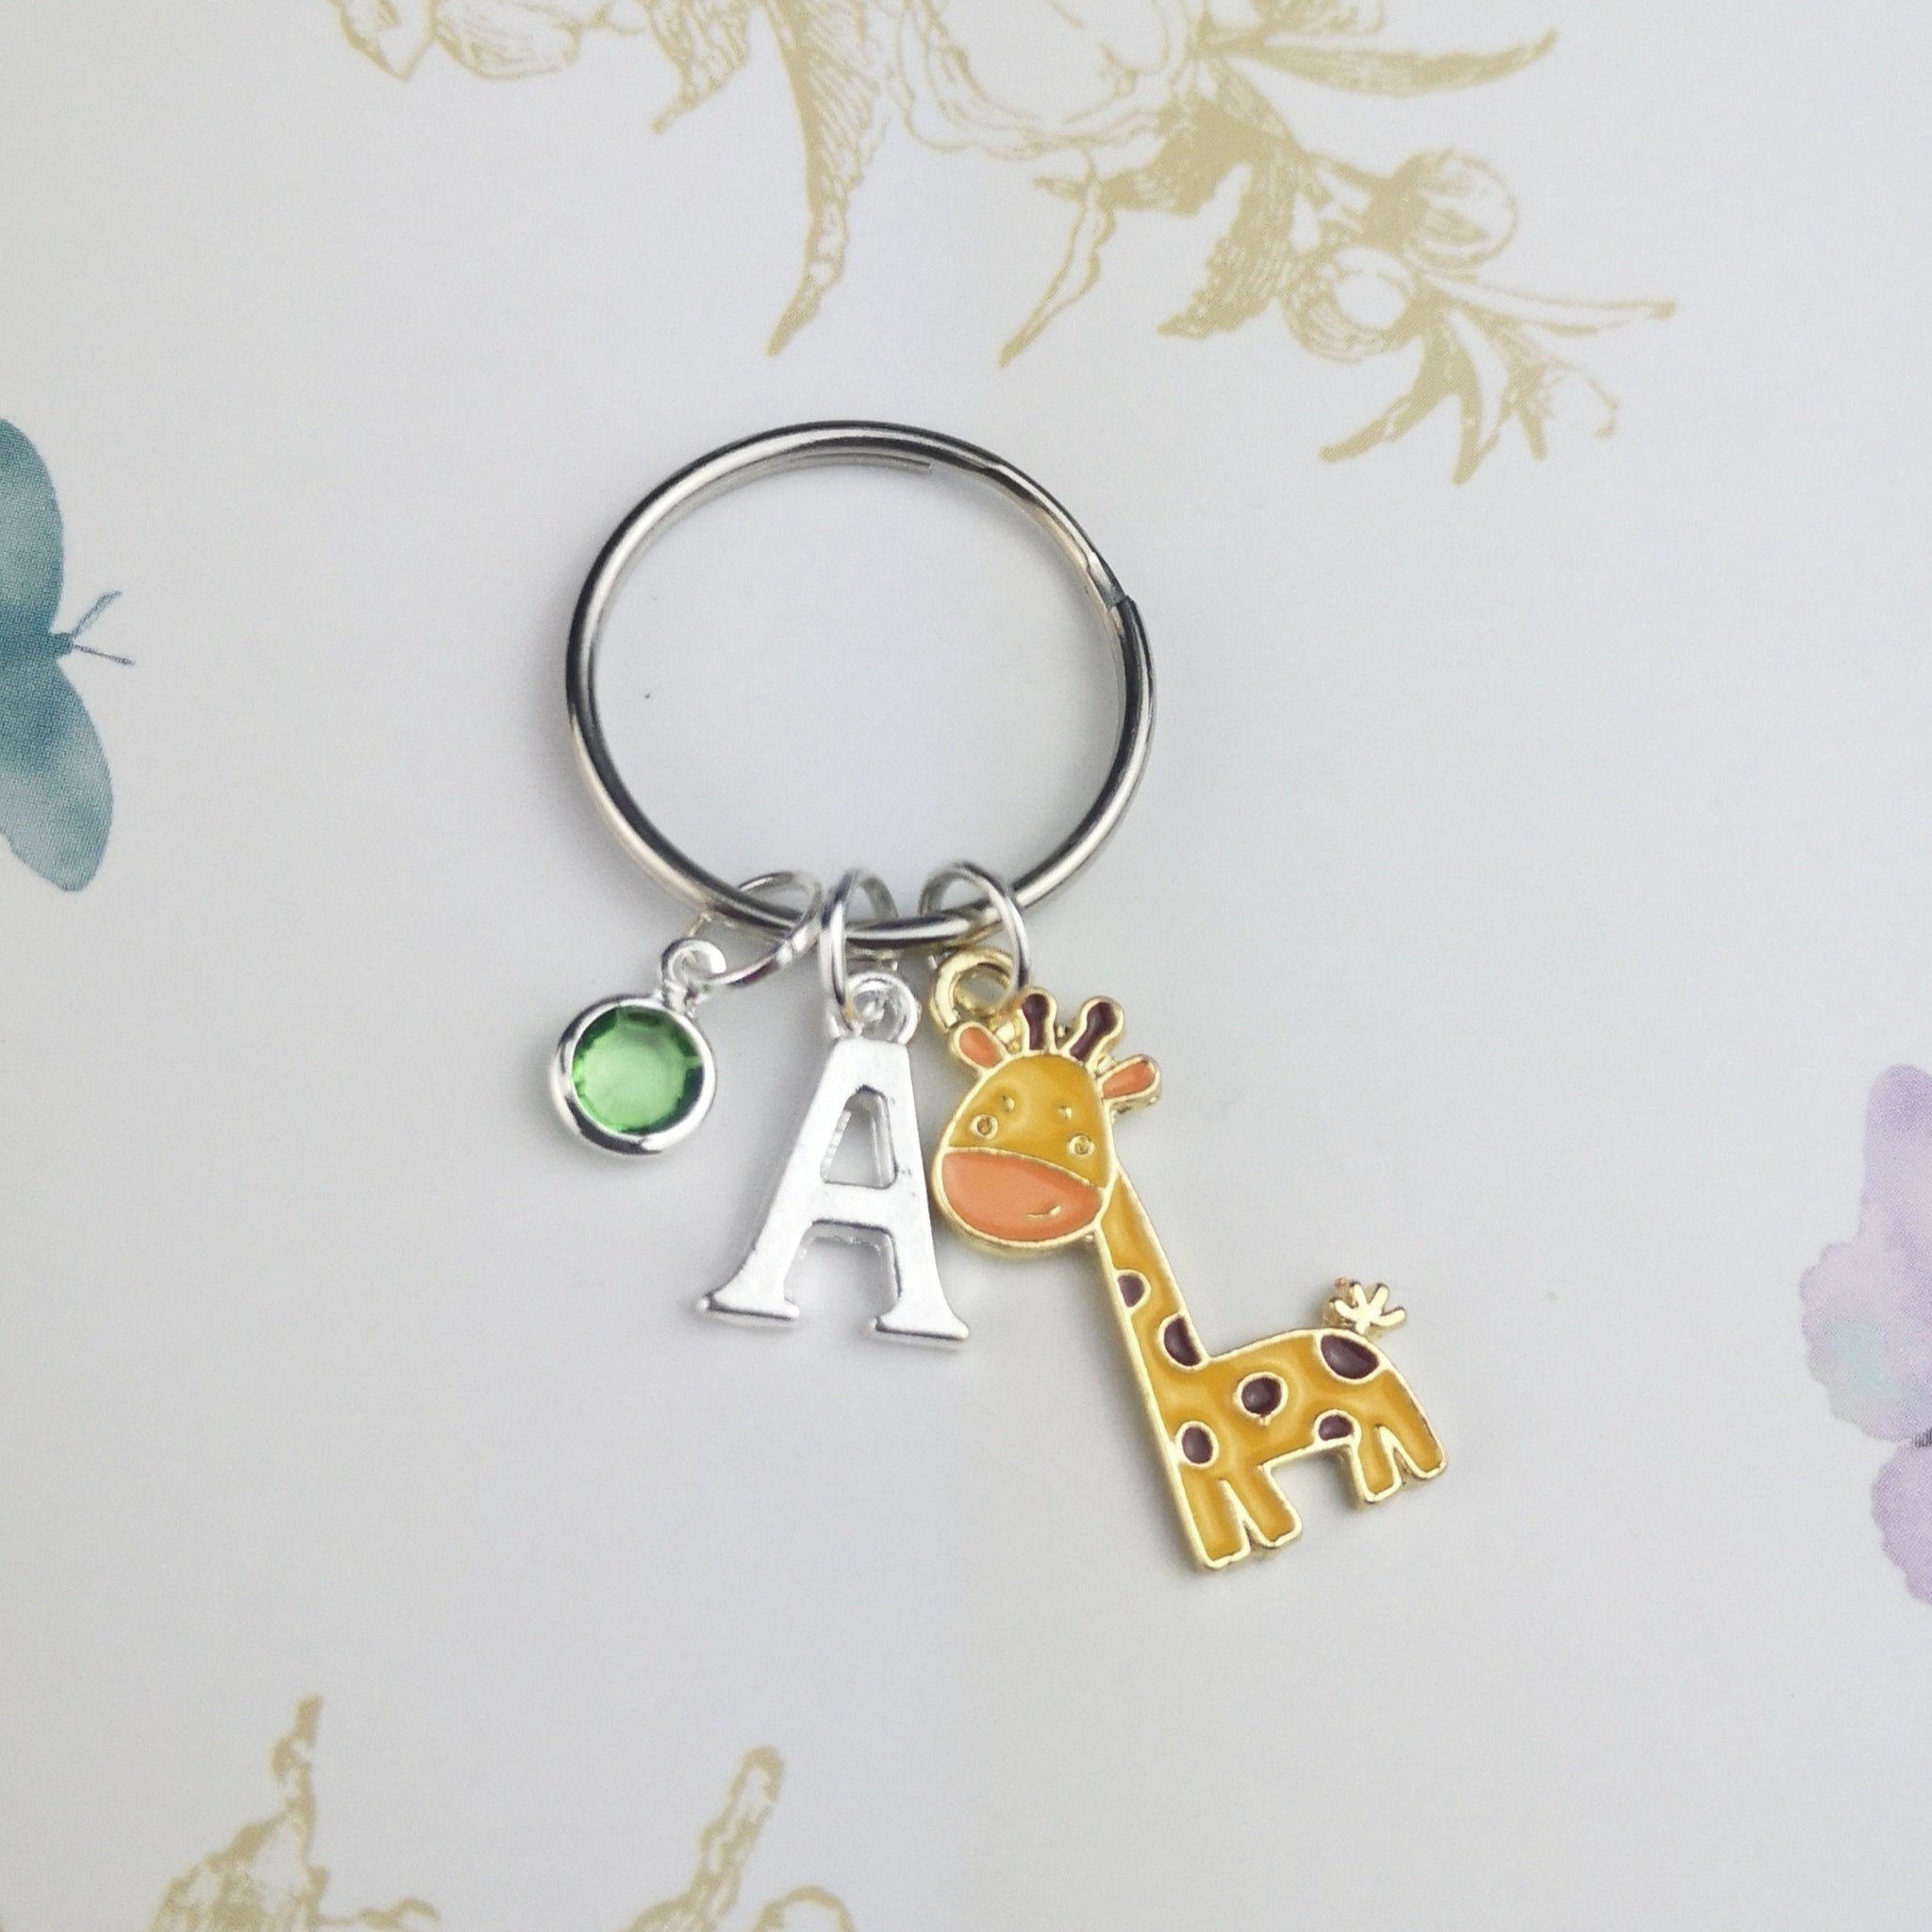 Personalised giraffe keyring with initial and birthstone